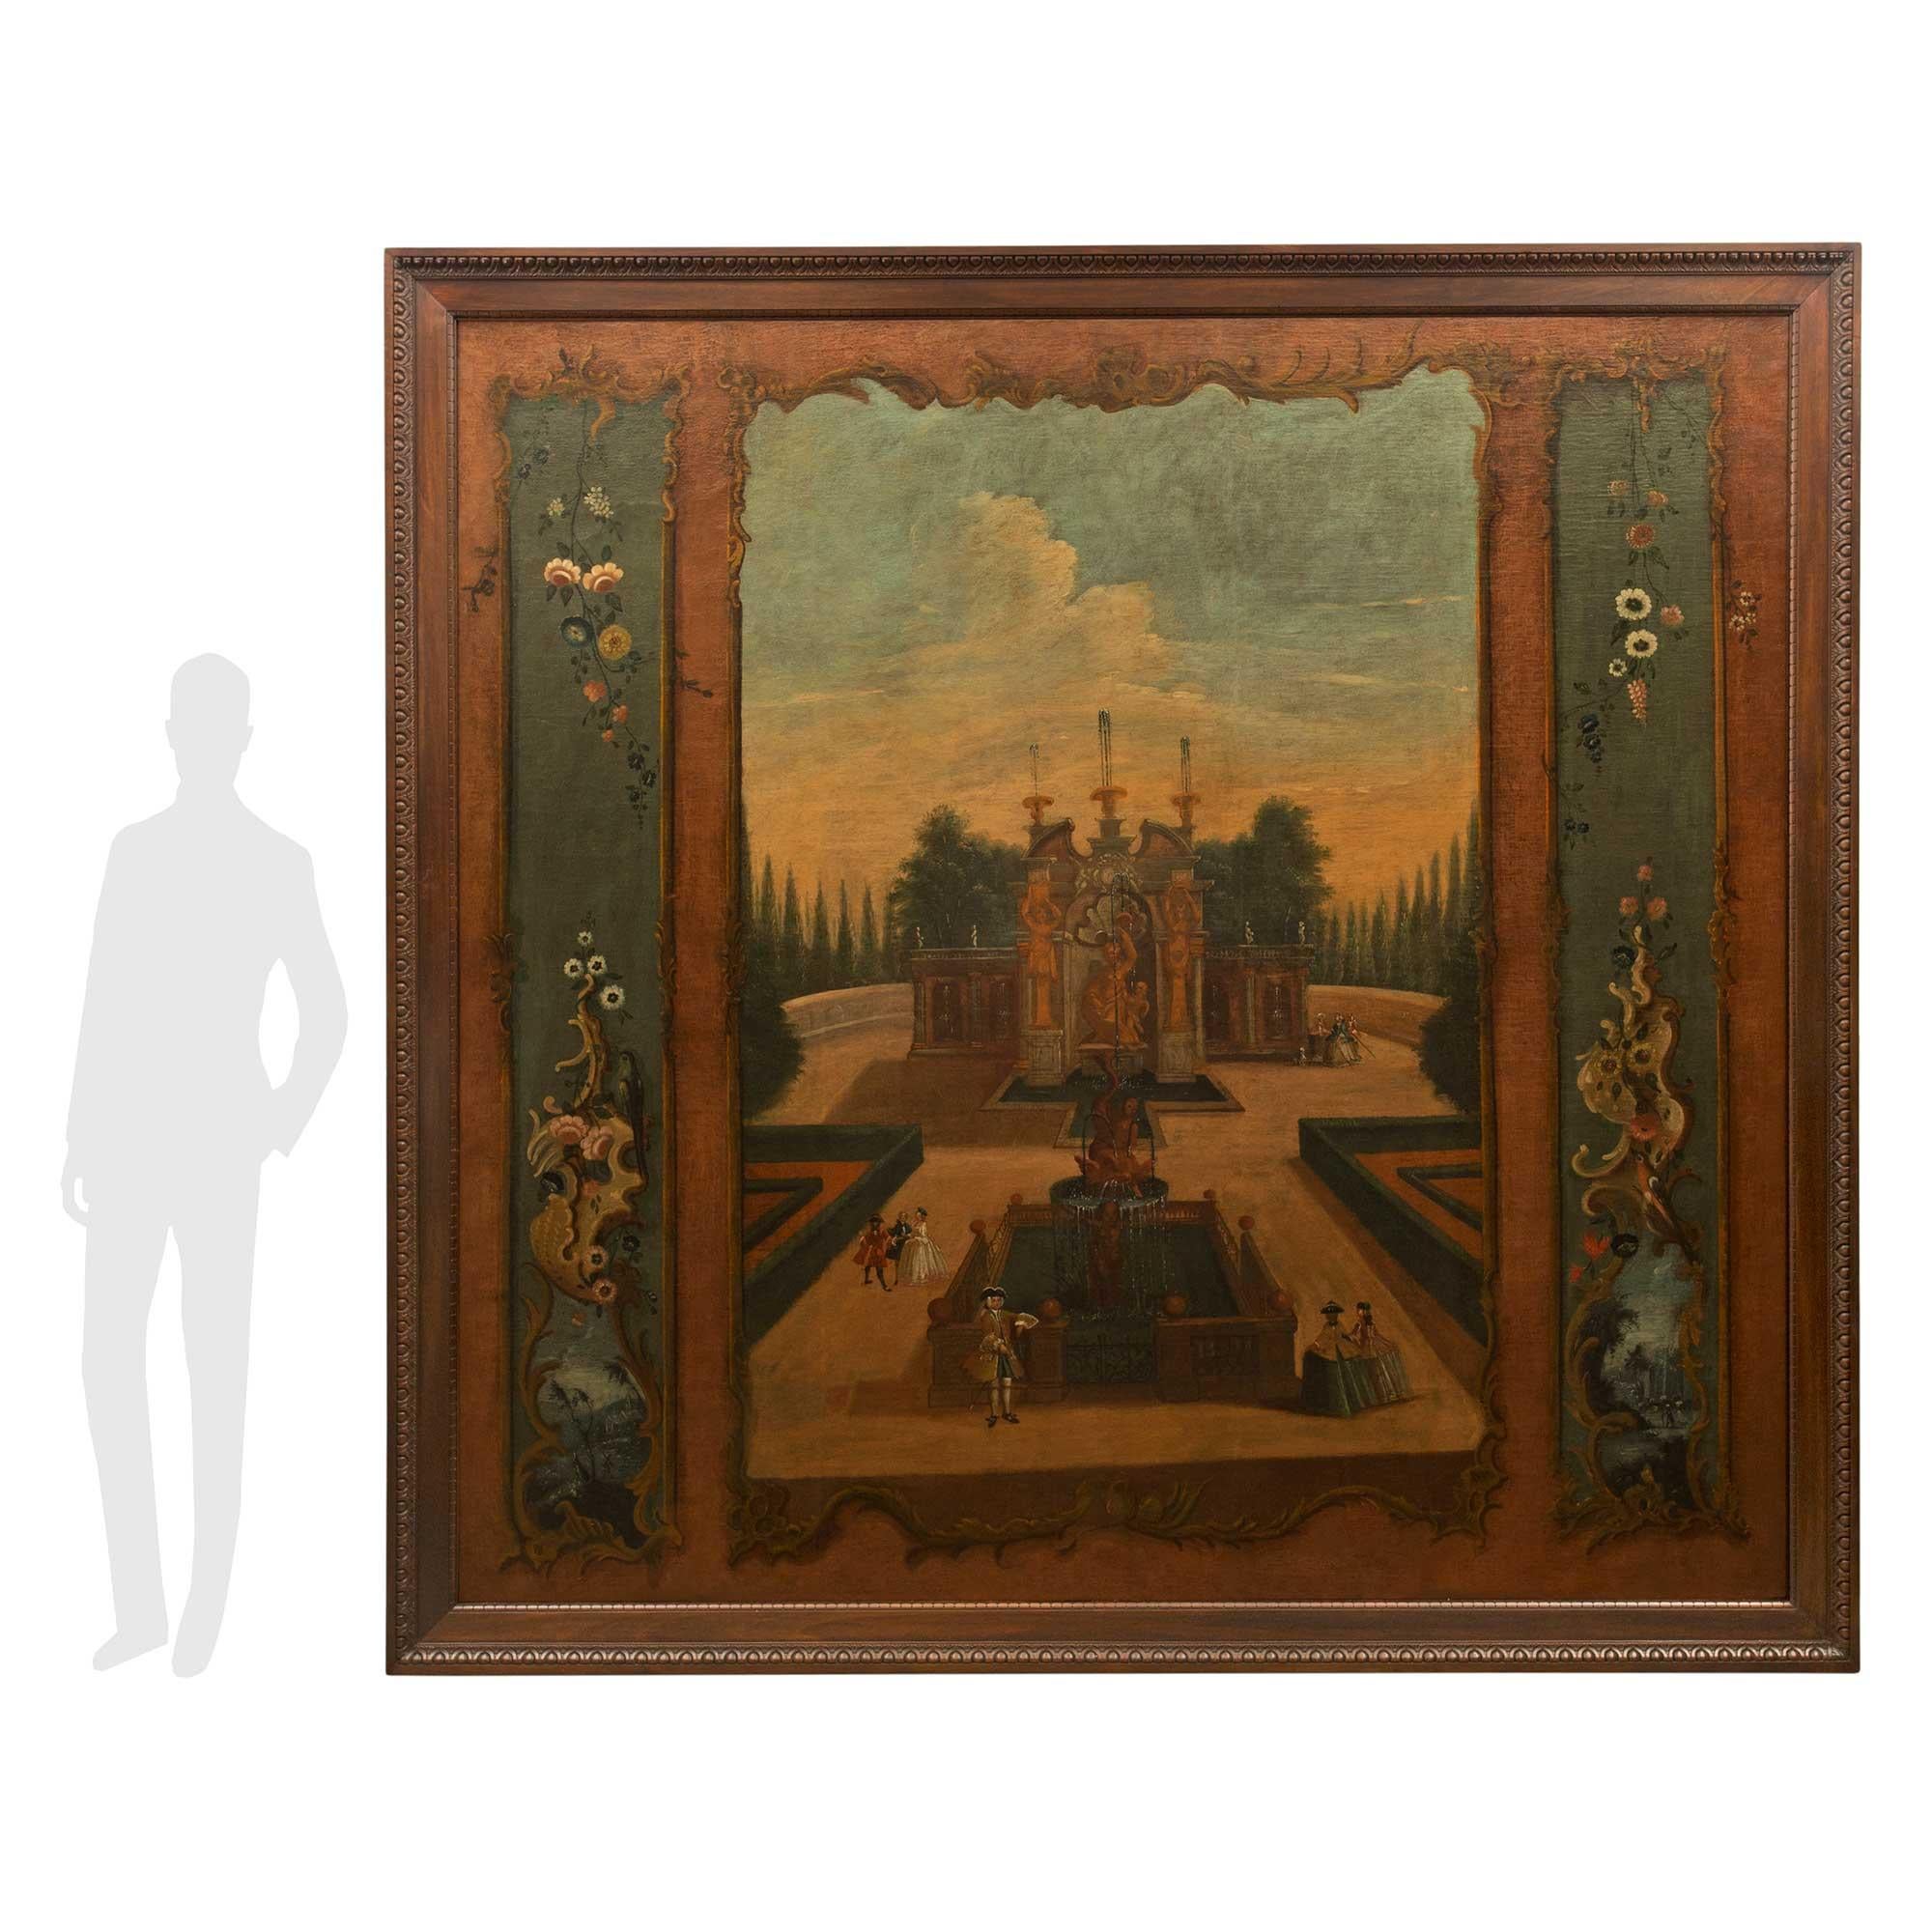 An impressive and large scale Continental 18th century oil on canvas painting. The painting is framed within a fine walnut frame with a carved wrap around Les Oves pattern. The painting depicts a beautiful and most charming scene of gardens and a